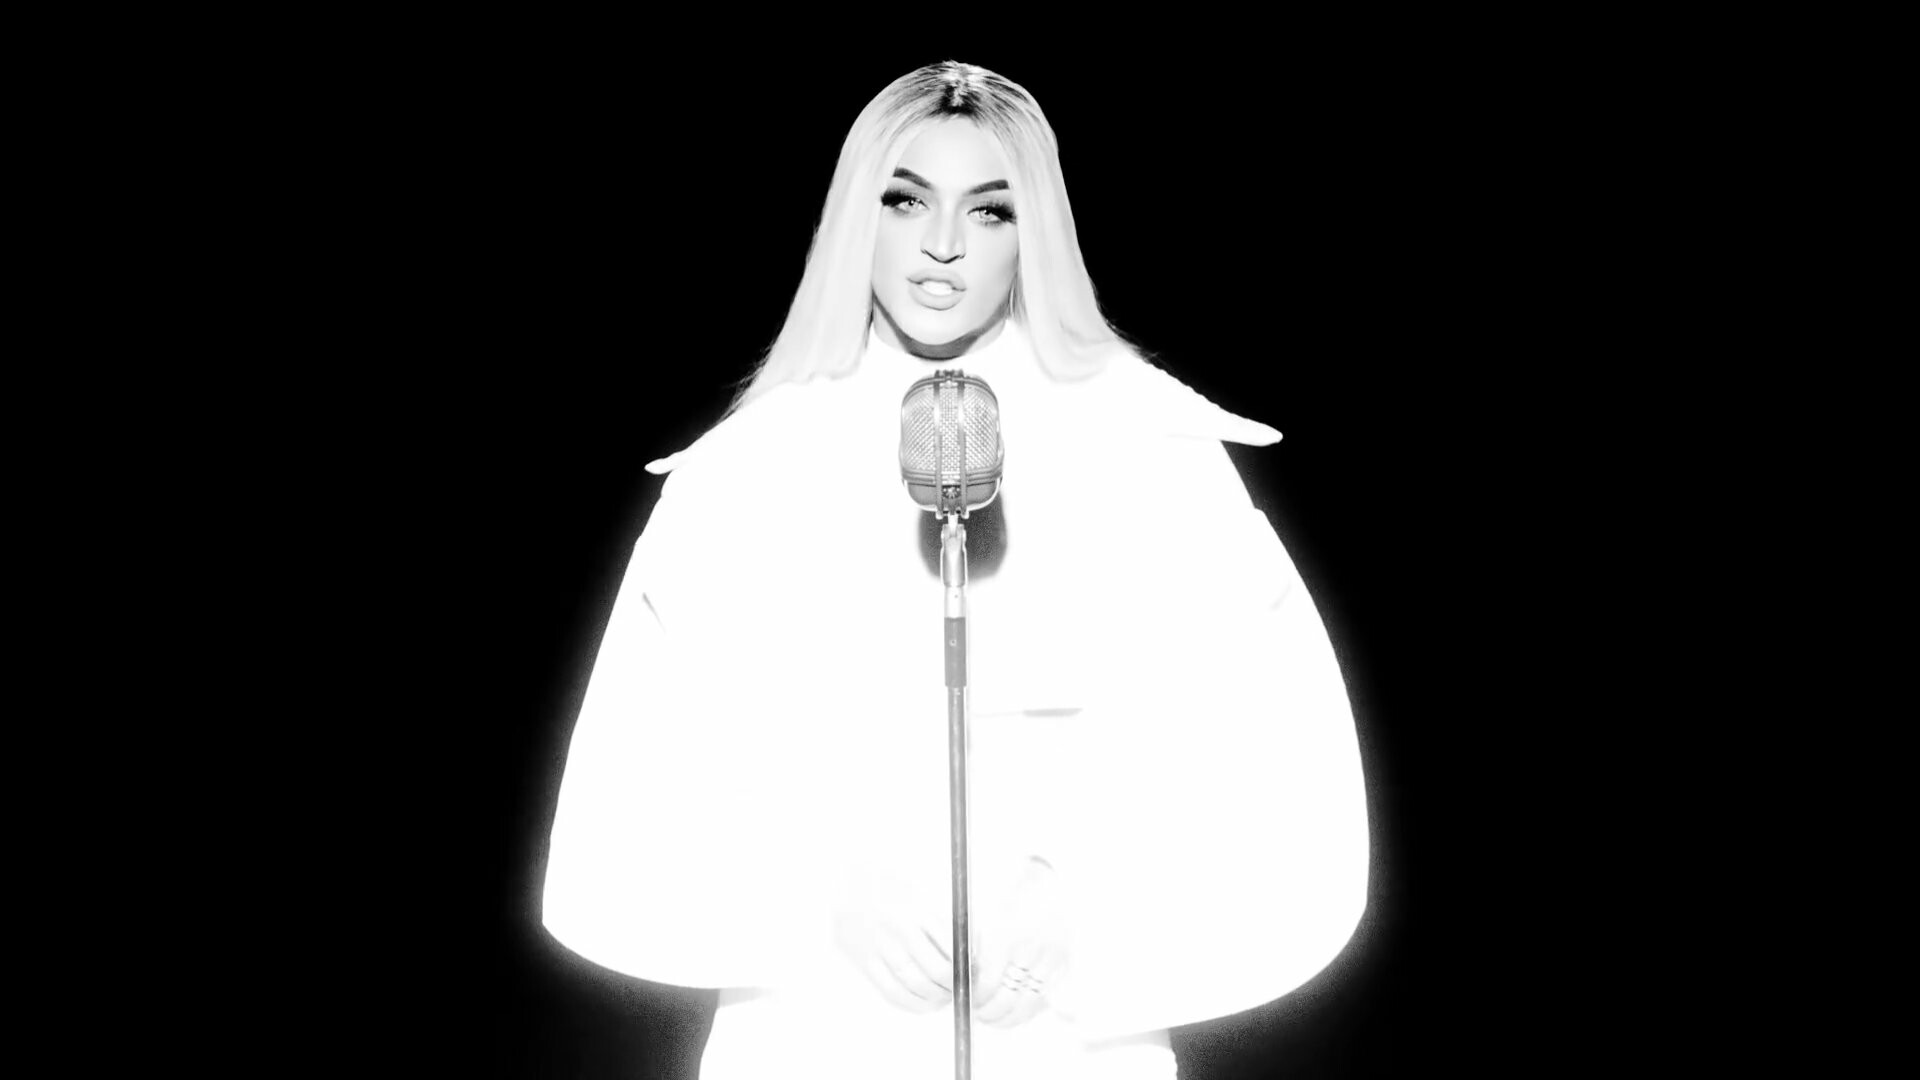 Pabllo Vittar: One of the most influential voices in Brazilian pop music, Monochrome. 1920x1080 Full HD Background.